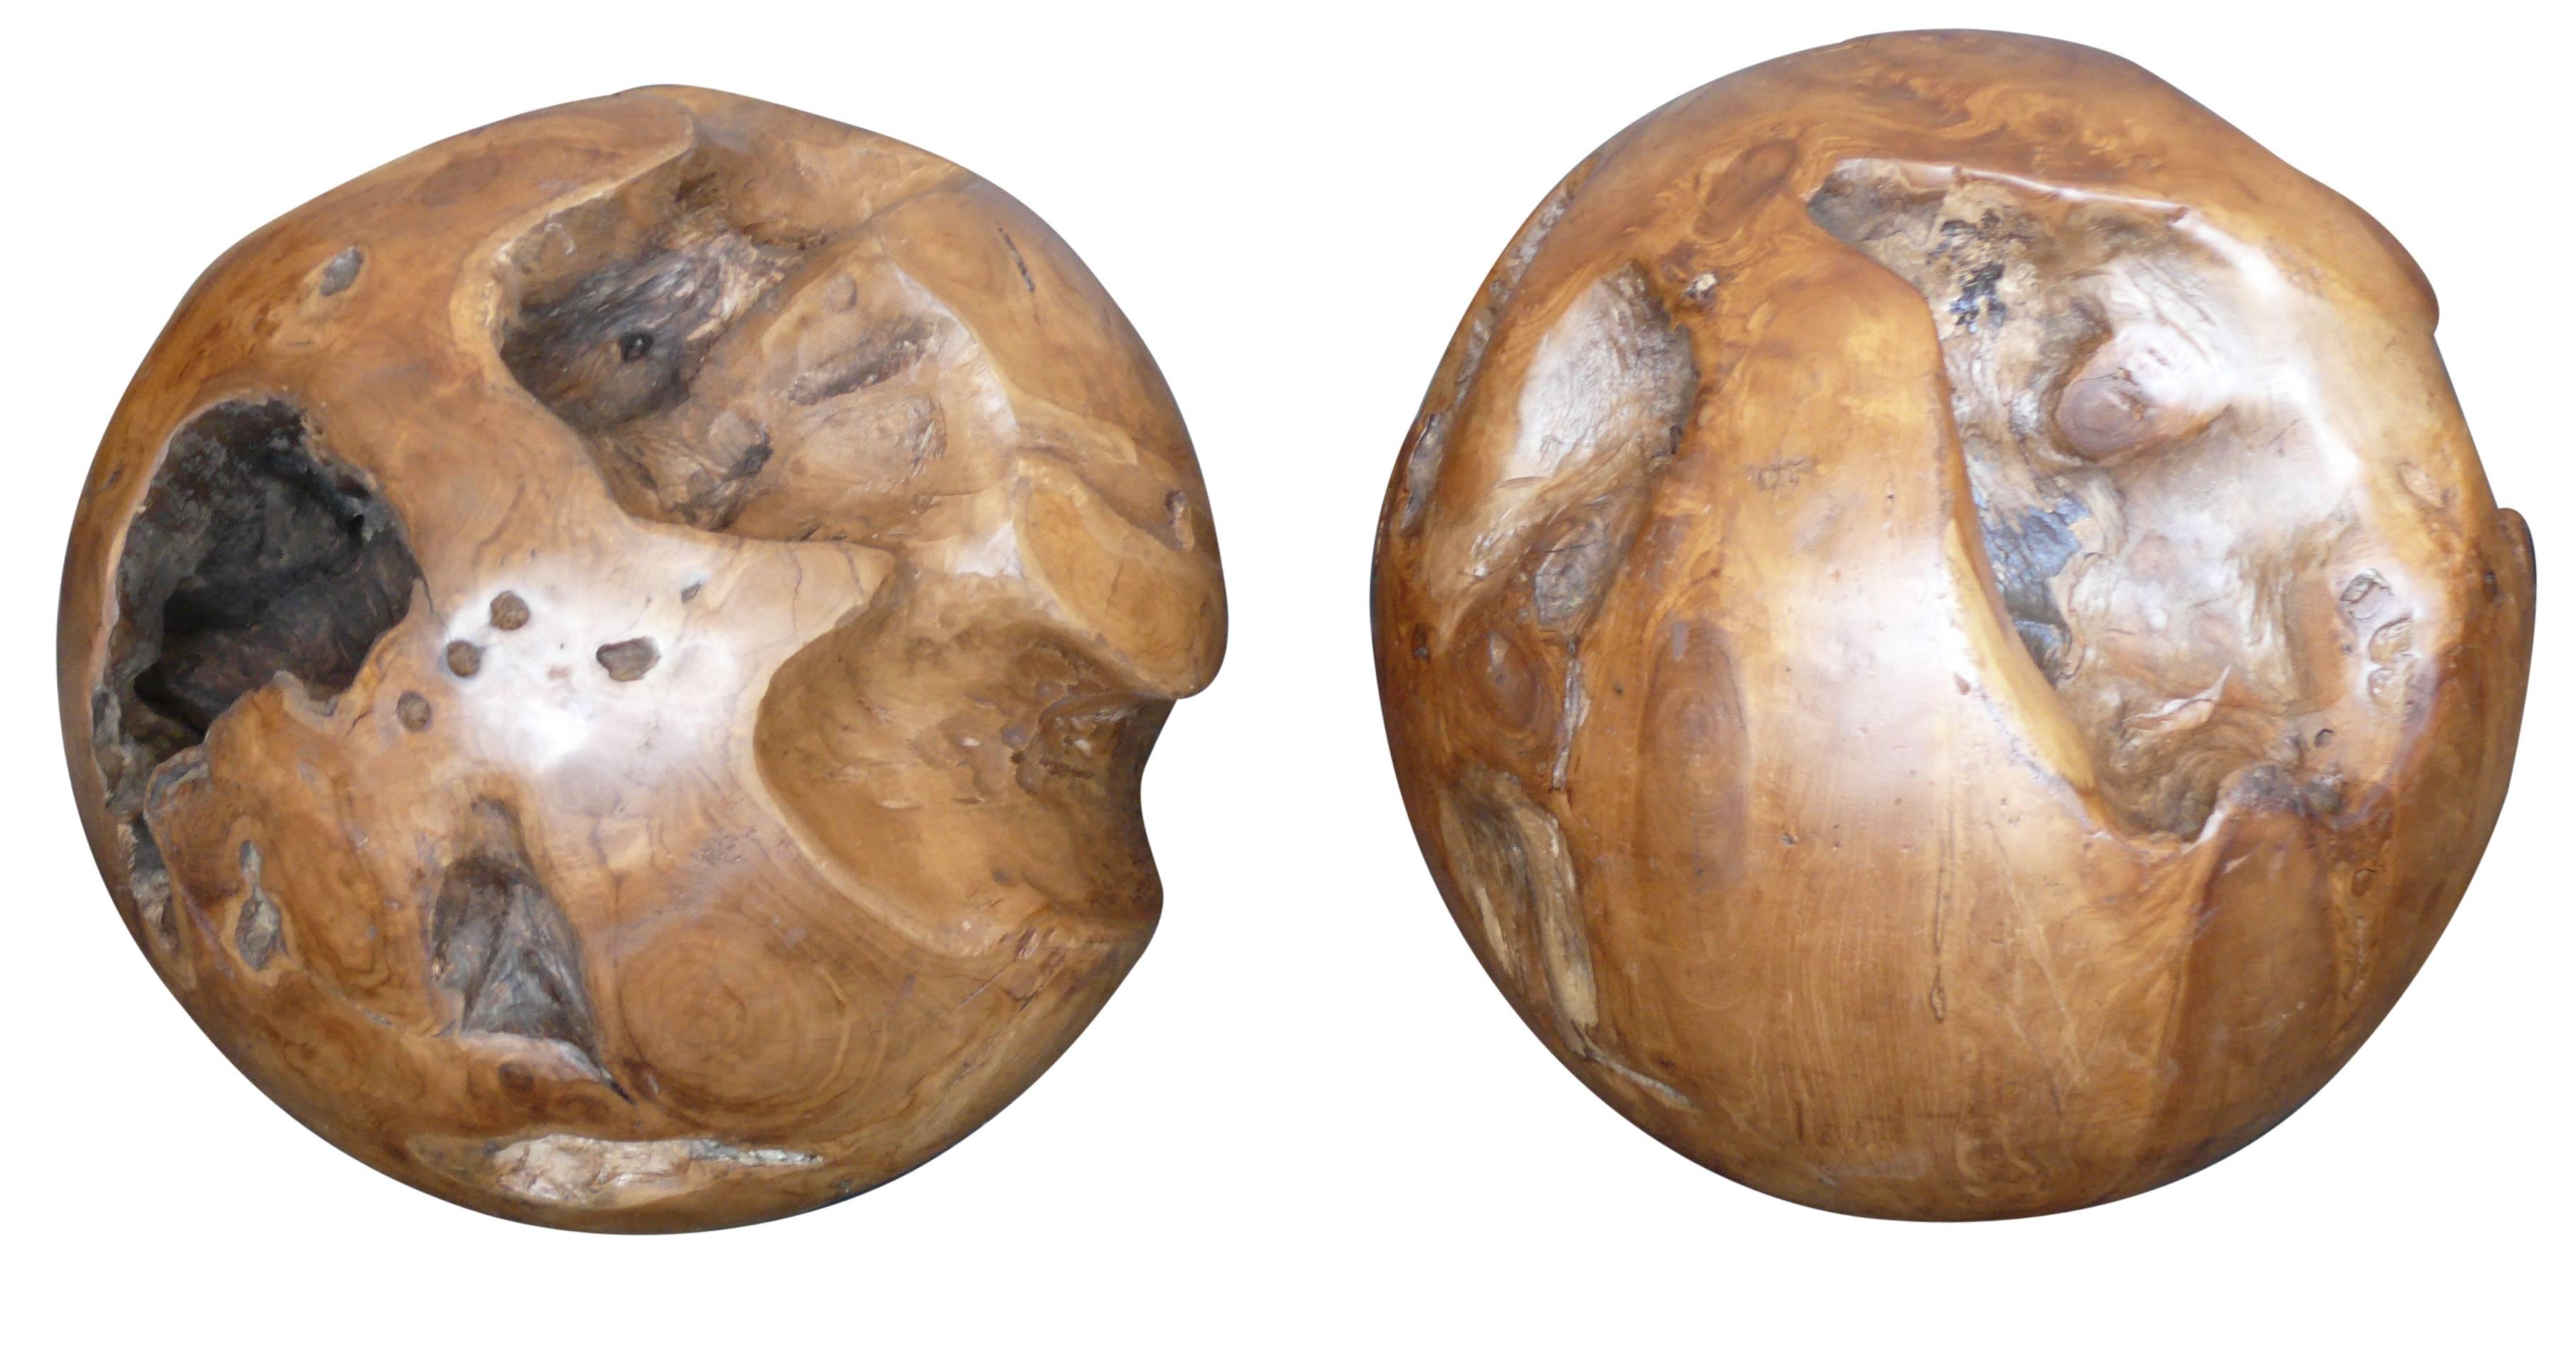 Sculptural set of large burl wood spheres or balls. Massive in scale. Each hand-carved ball is unique and in excellent vintage condition. Great stand alone sculpture or object.
Two more available and priced individually.